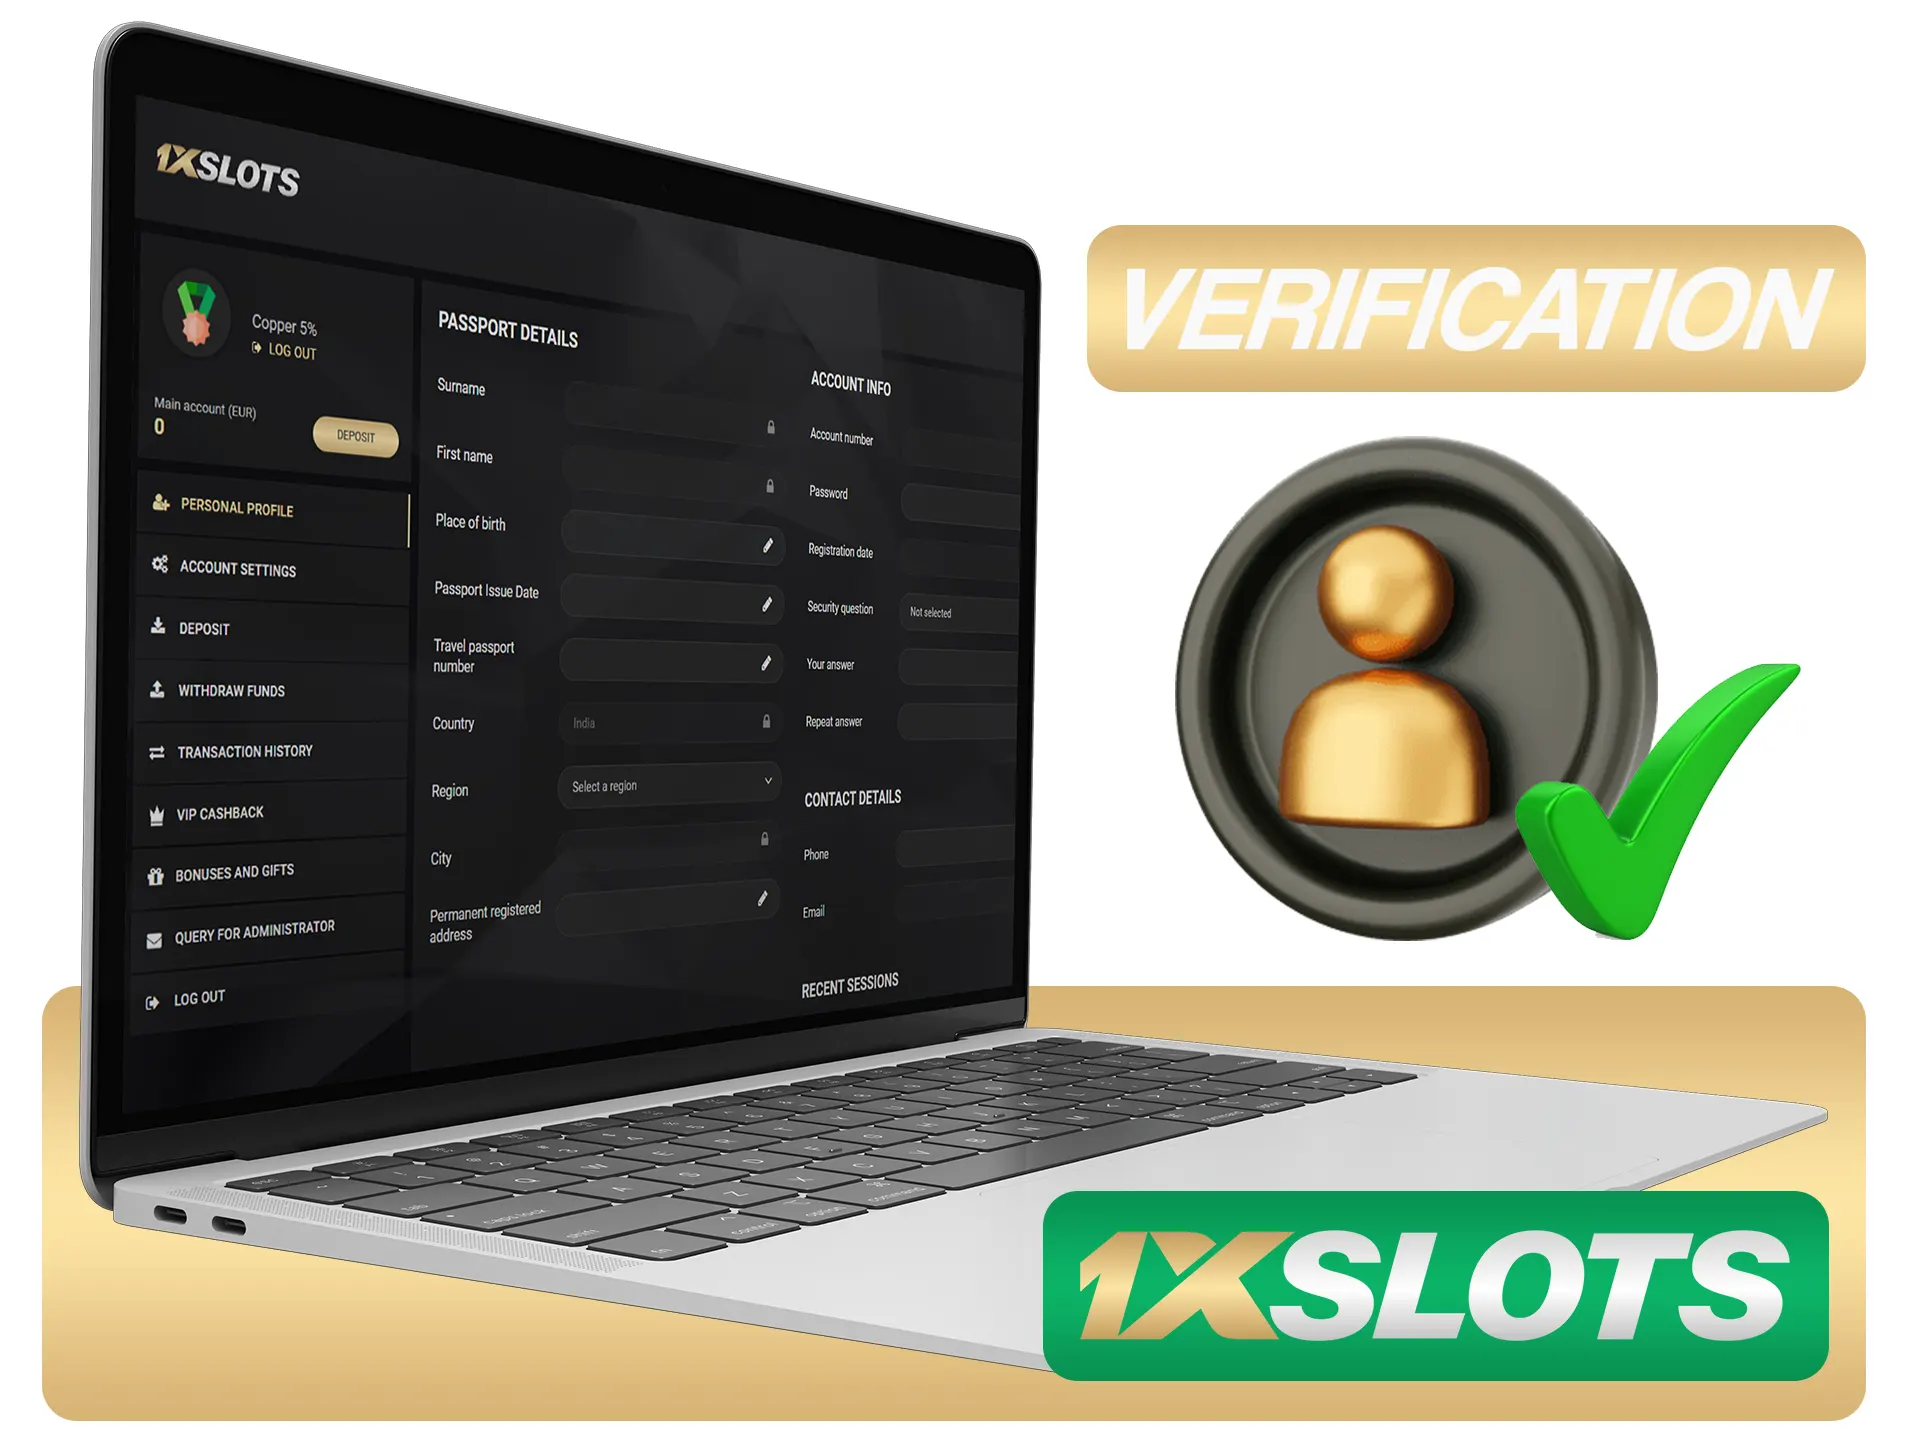 Verify your 1xSlots account by providing required data.